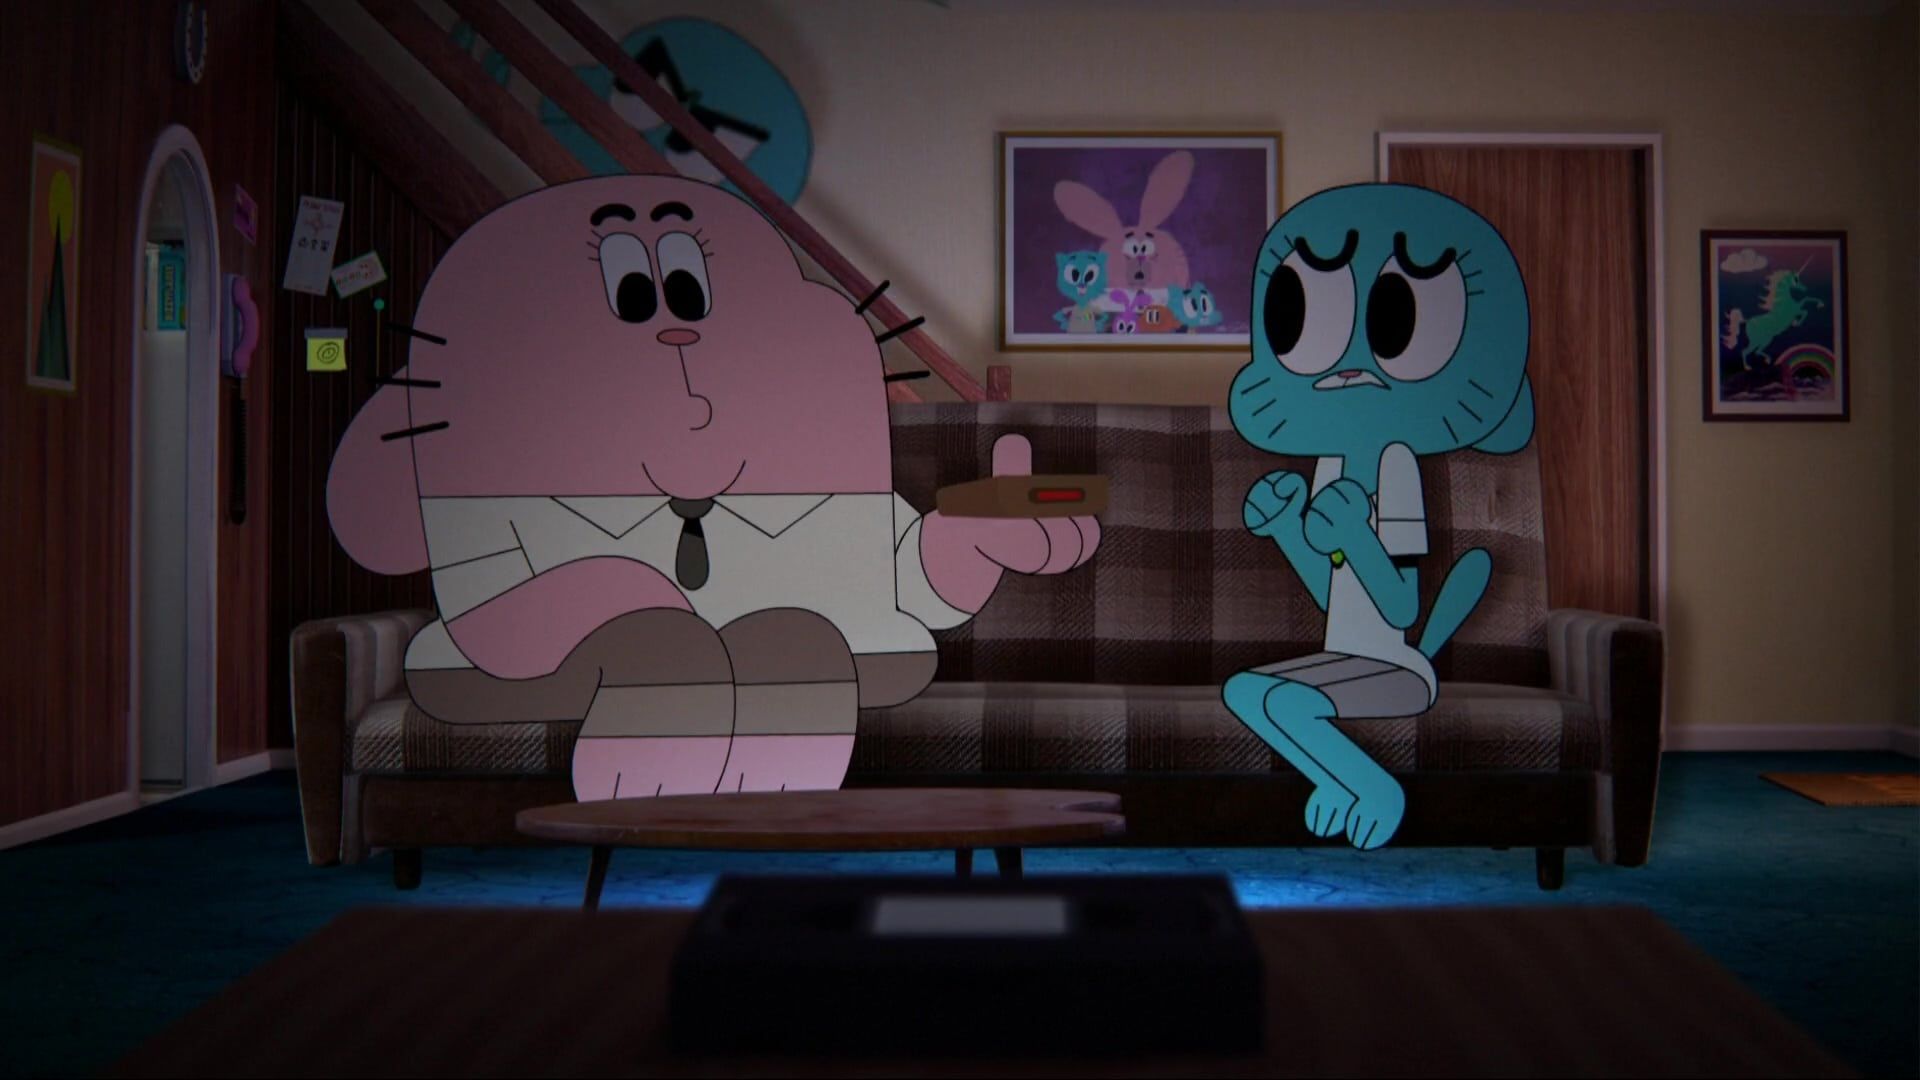 Watch The Amazing World of Gumball Online - Stream Full Episodes